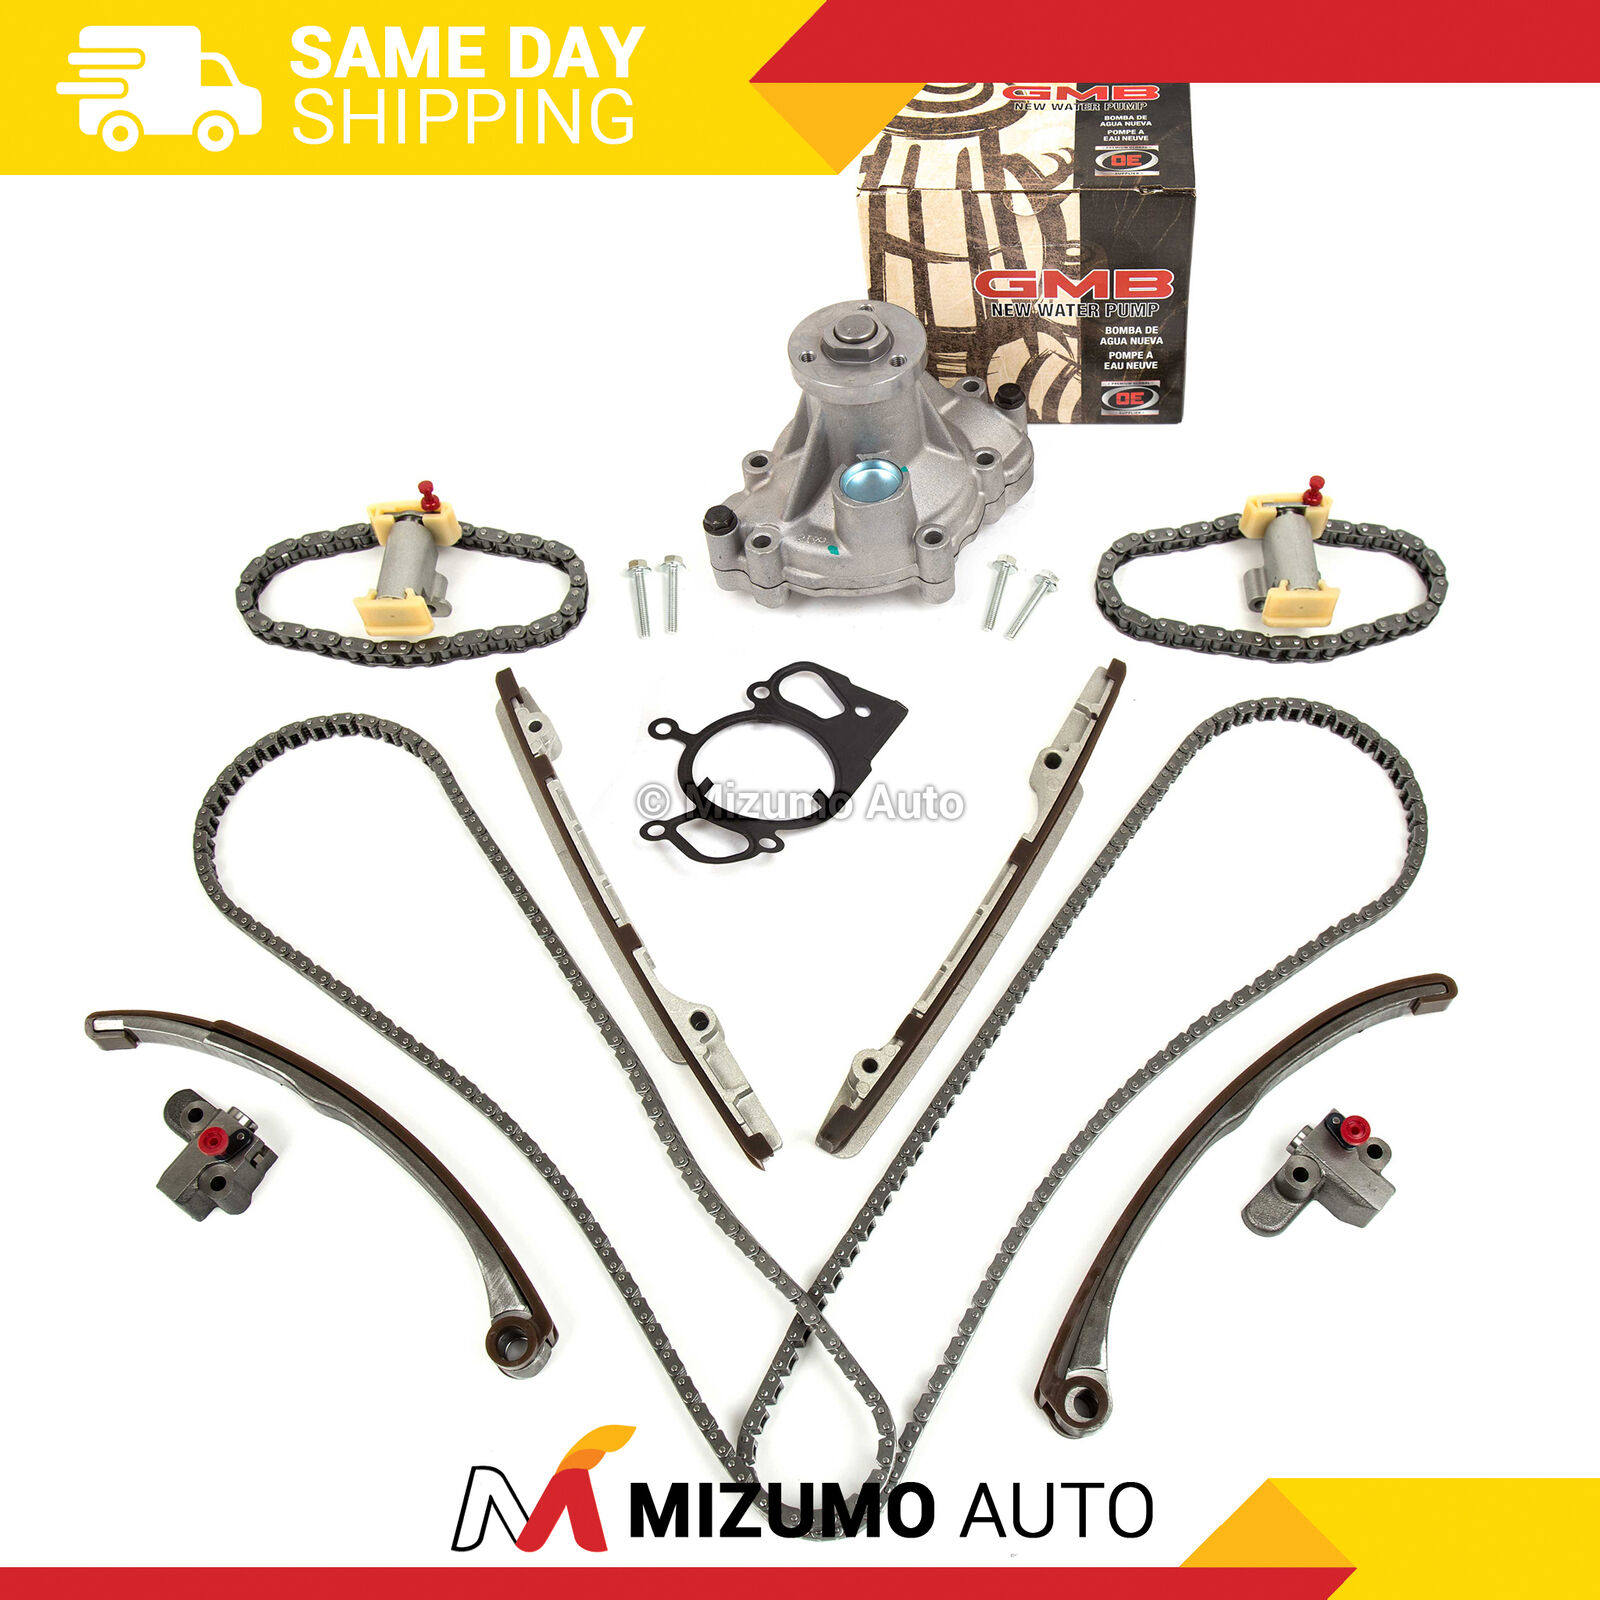 Timing Chain Kit Water Pump Fit 02-08 Jaguar Lincoln Land Rover 3.9 4.0 4.2 4.4L